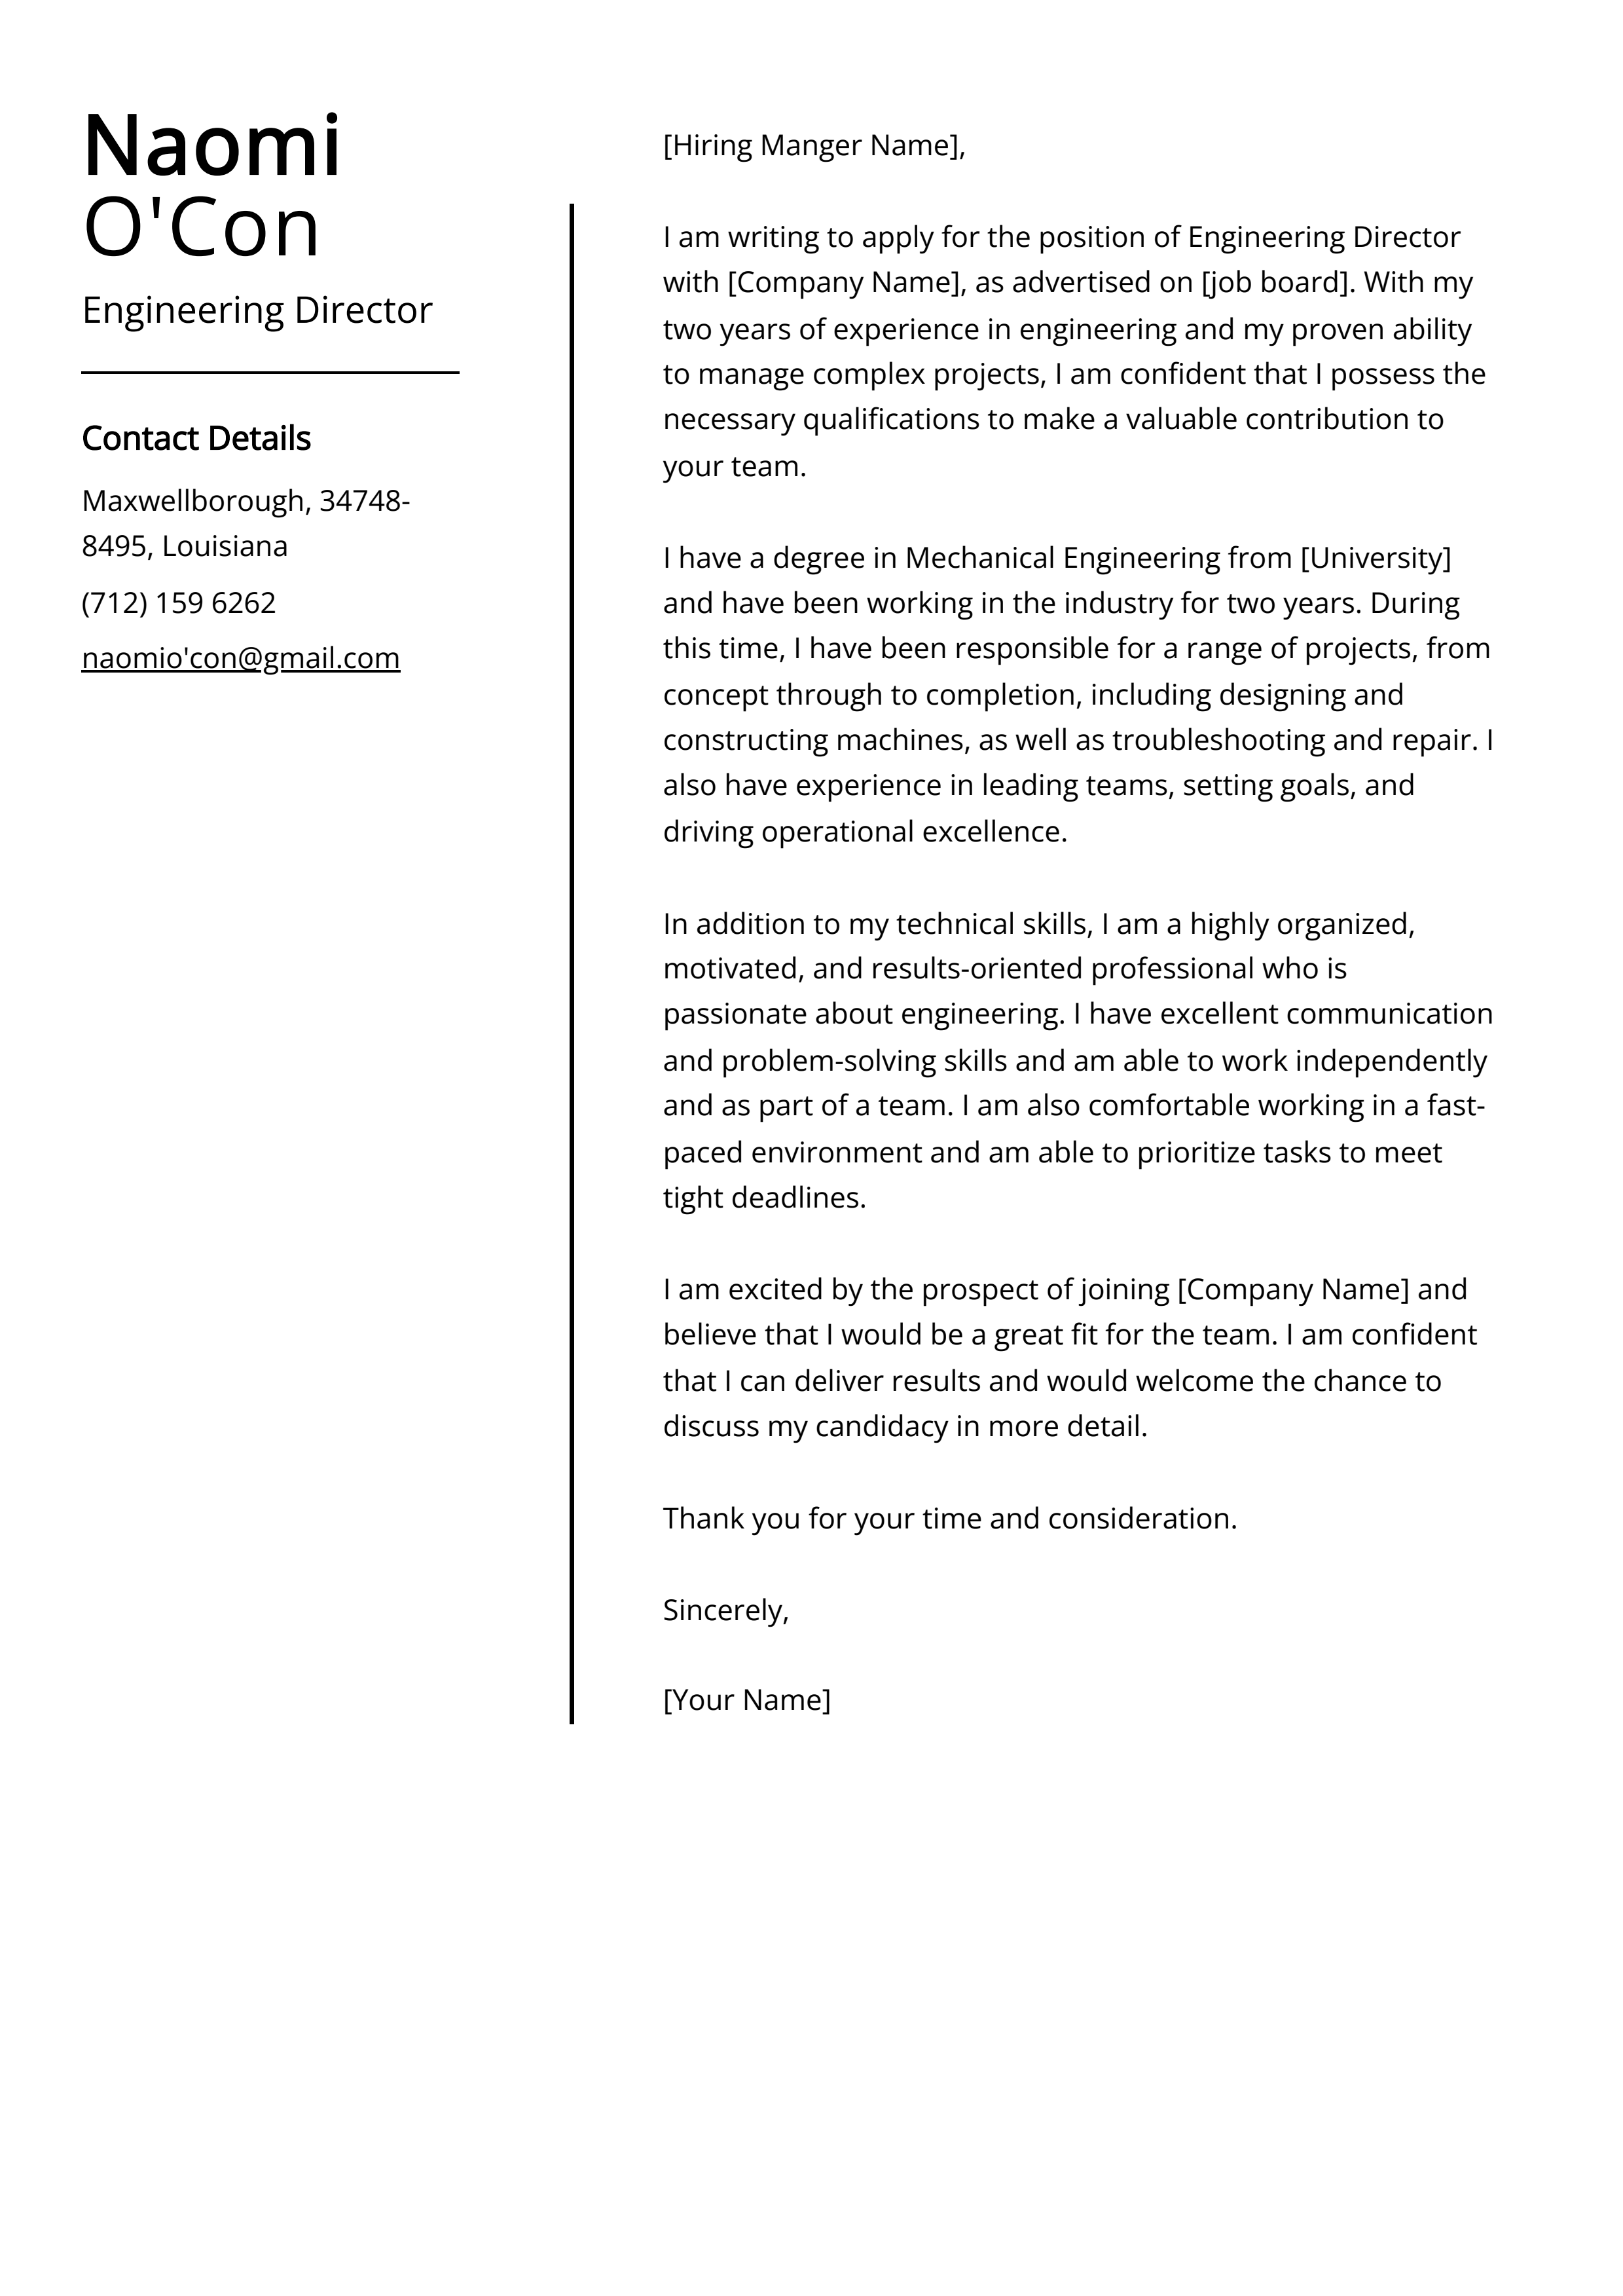 Engineering Director Cover Letter Example